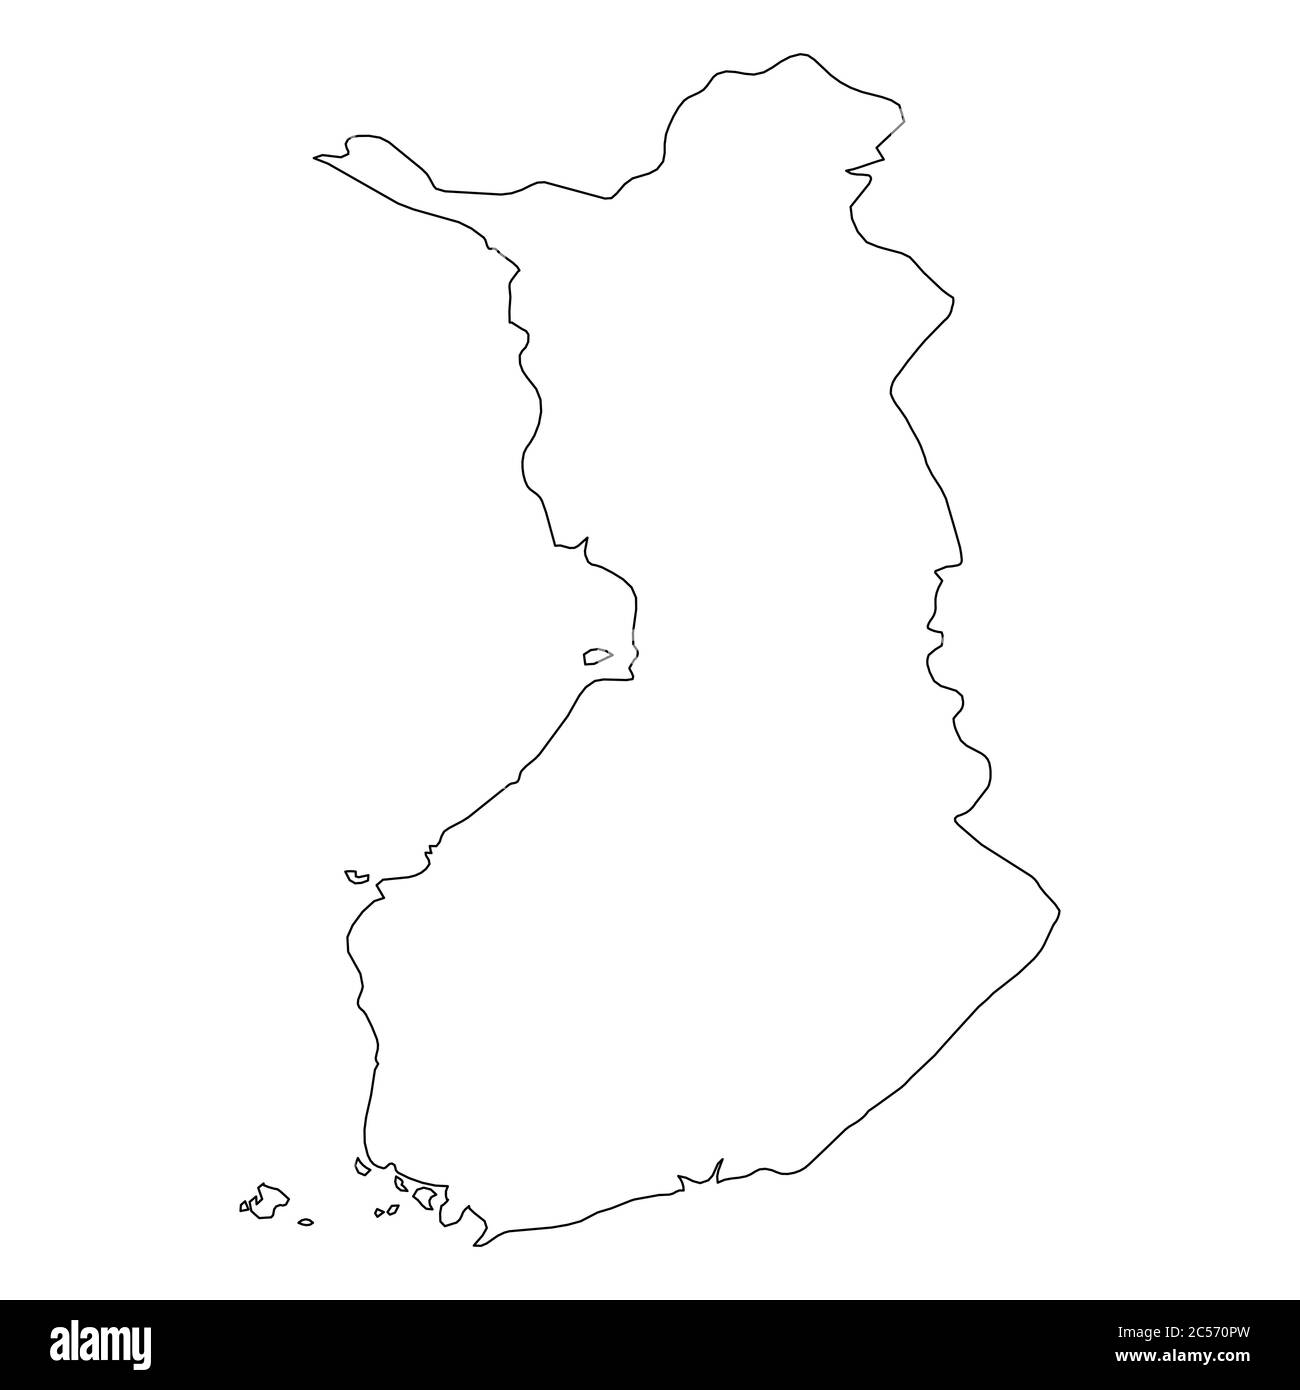 Finland - solid black outline border map of country area. Simple flat vector illustration. Stock Vector